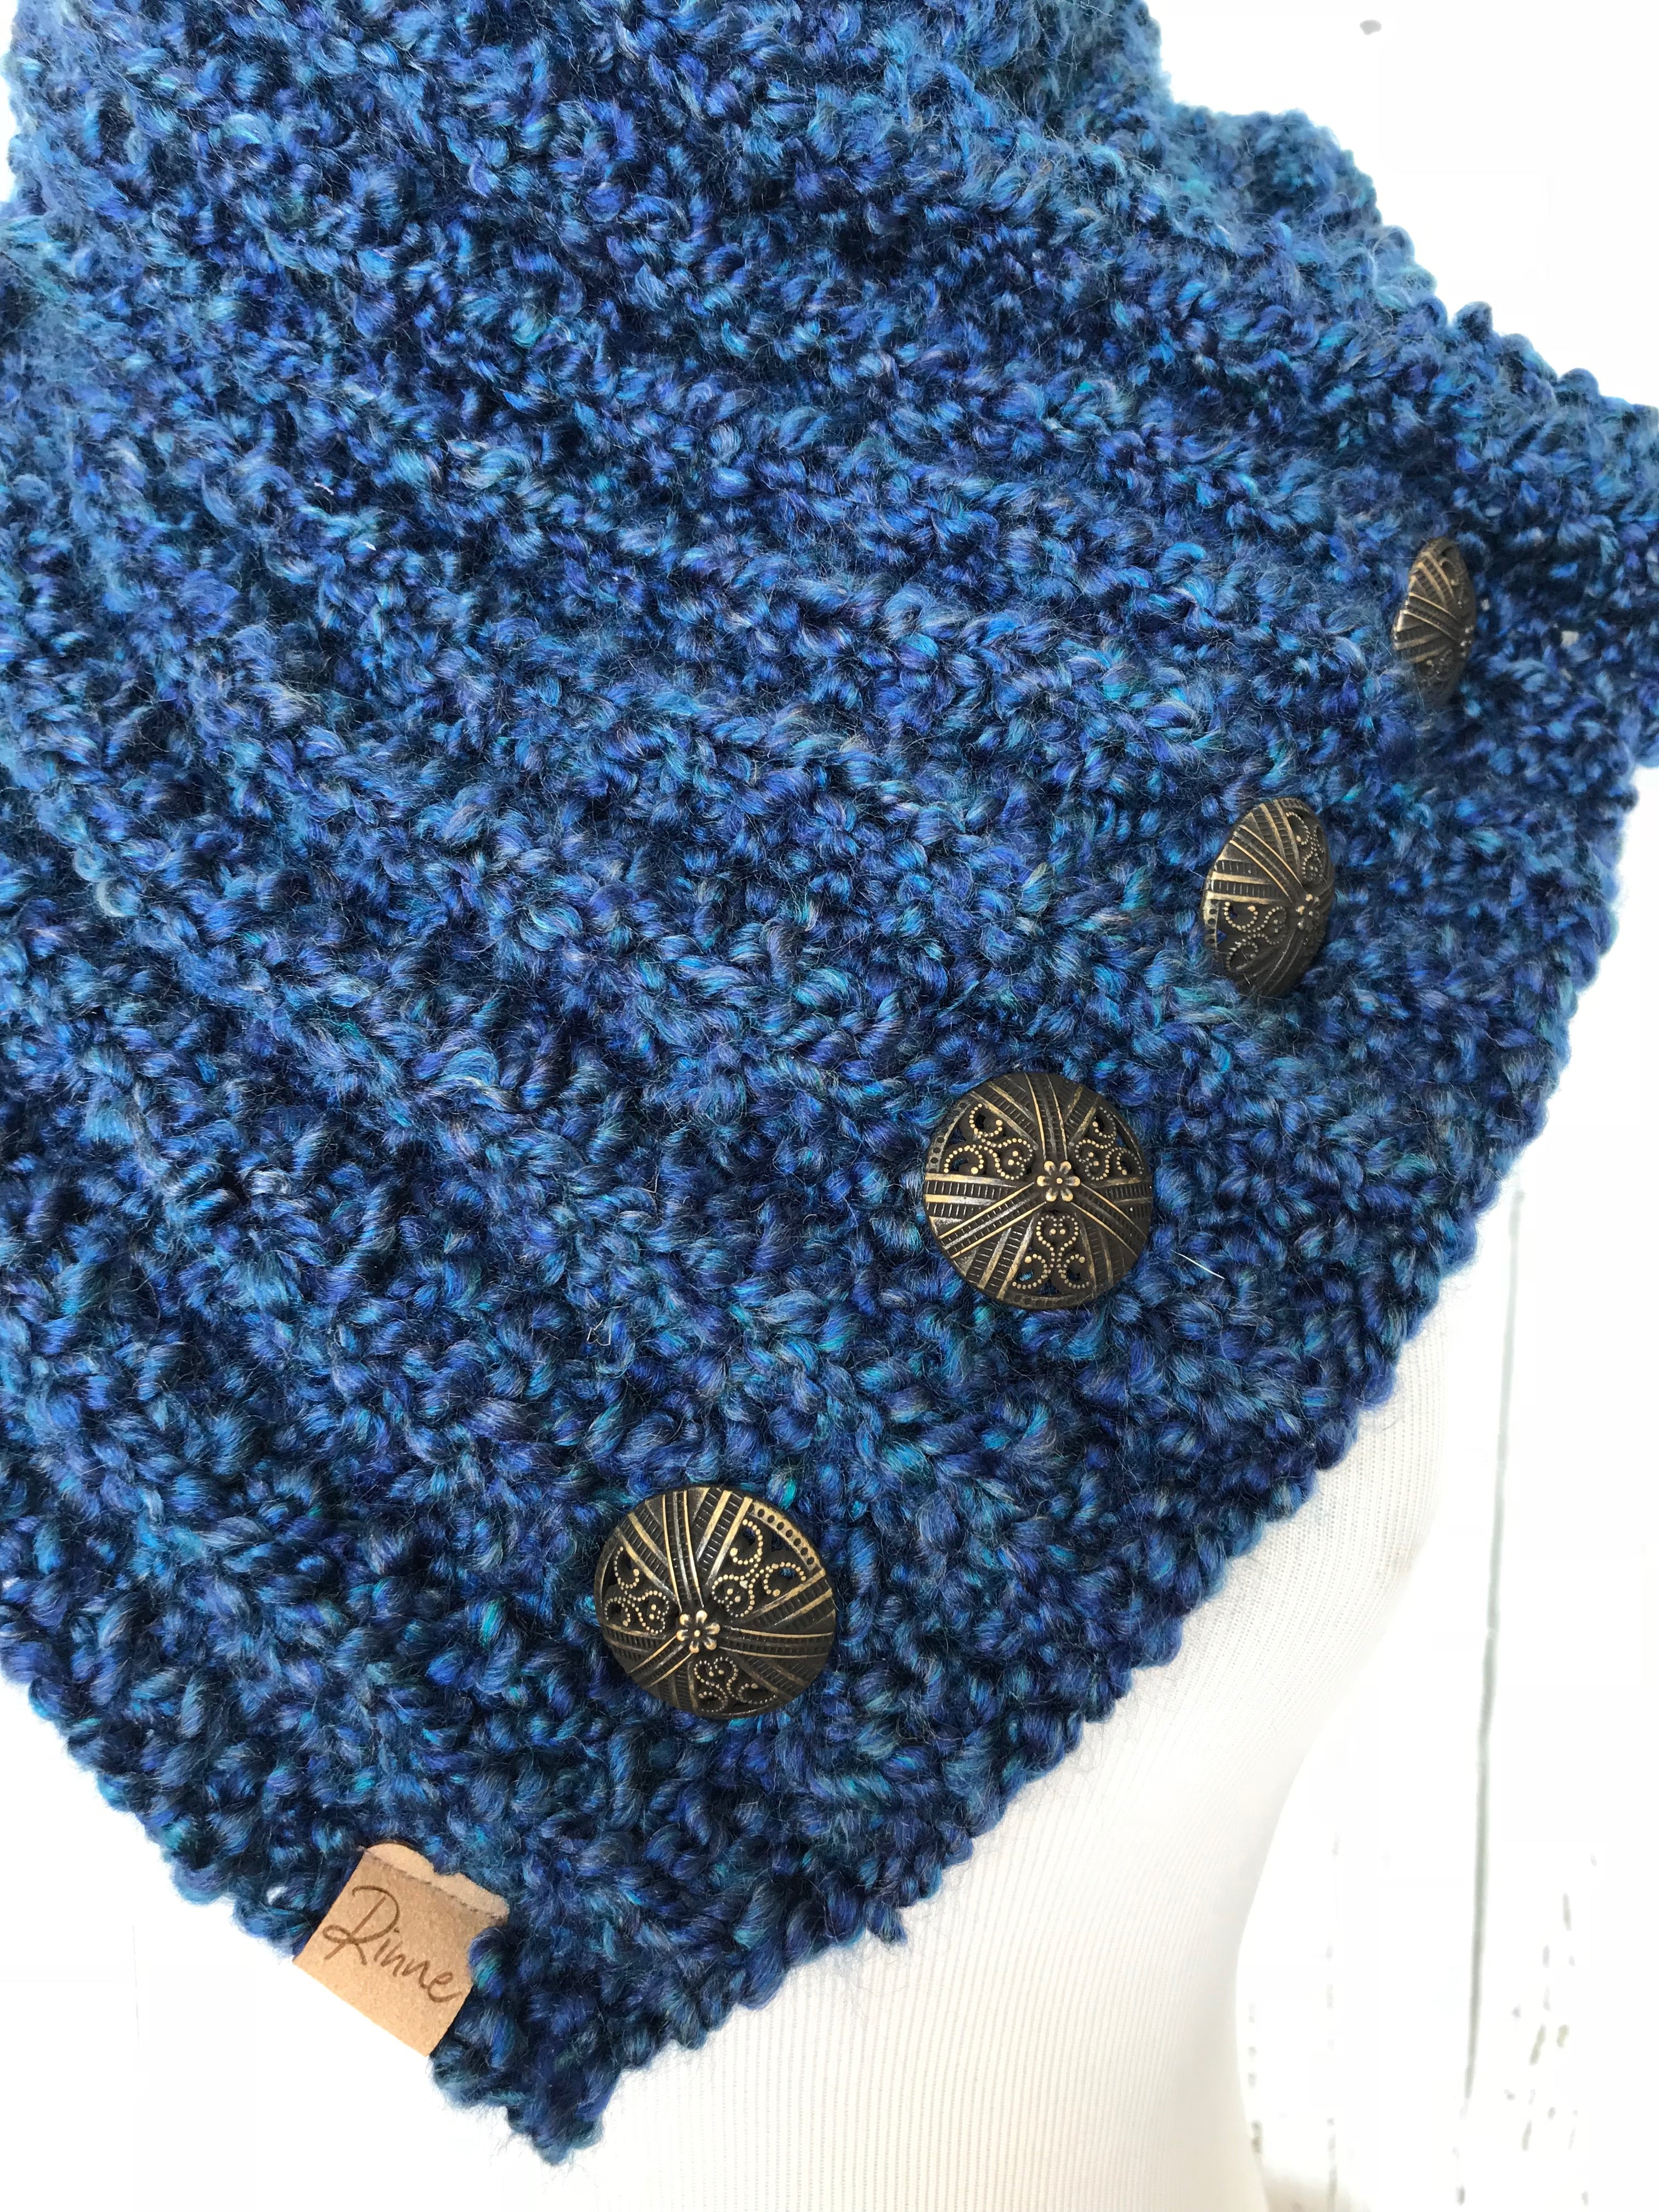 Classic Knit Button Cowl in colonial heathered blue with bronze buttons